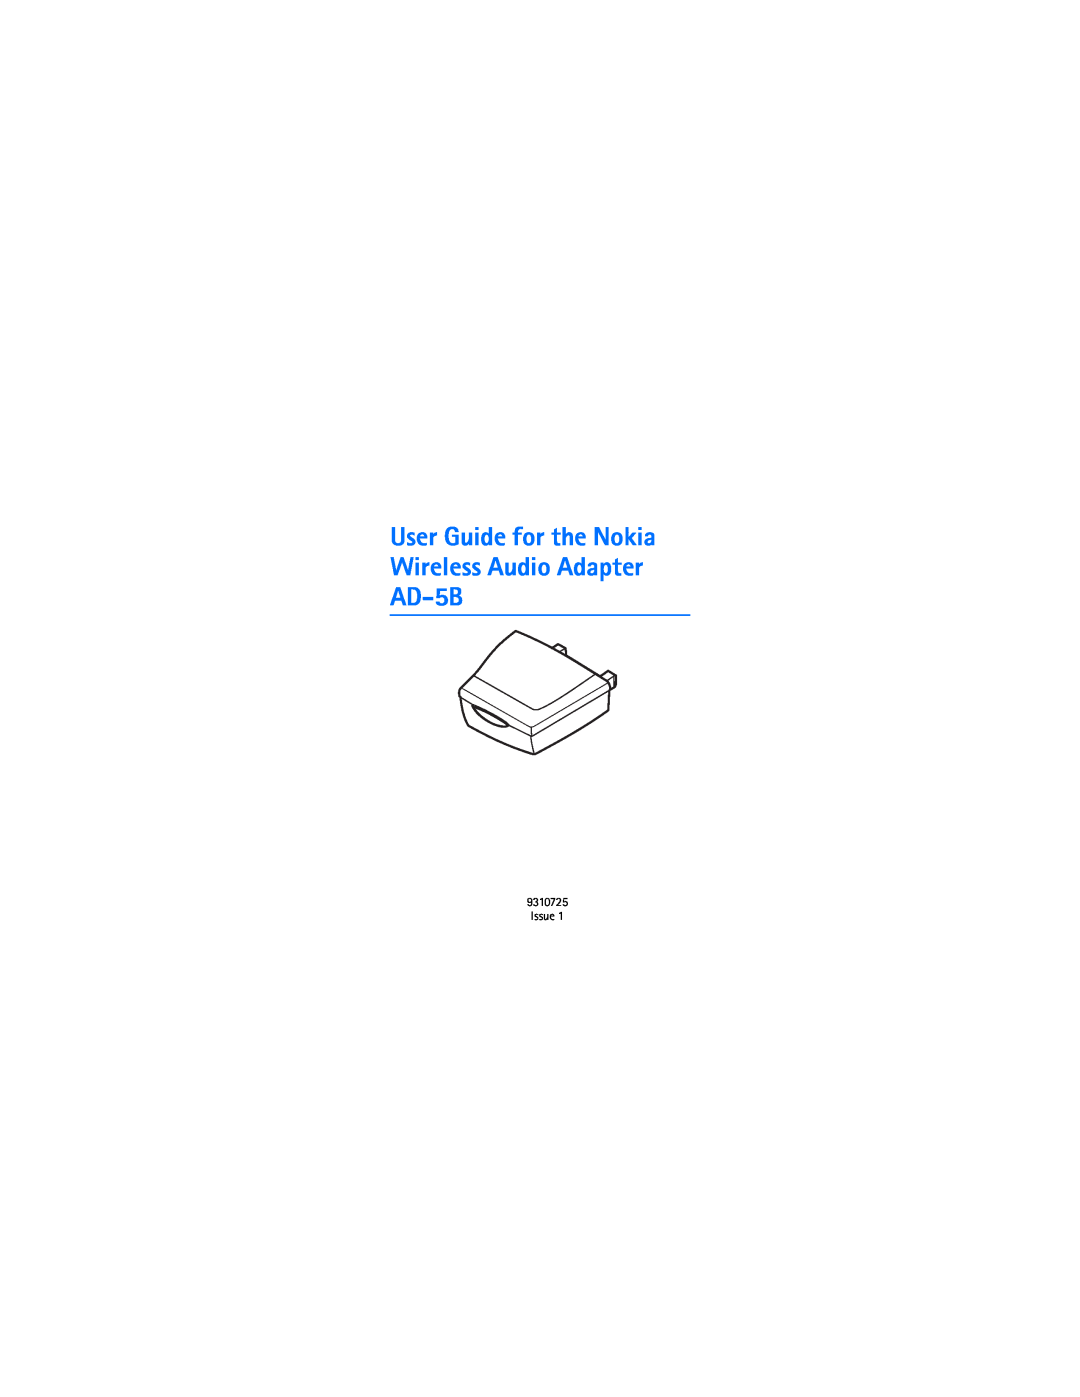 Nokia manual User Guide for the Nokia Wireless Audio Adapter AD-5B, Issue 